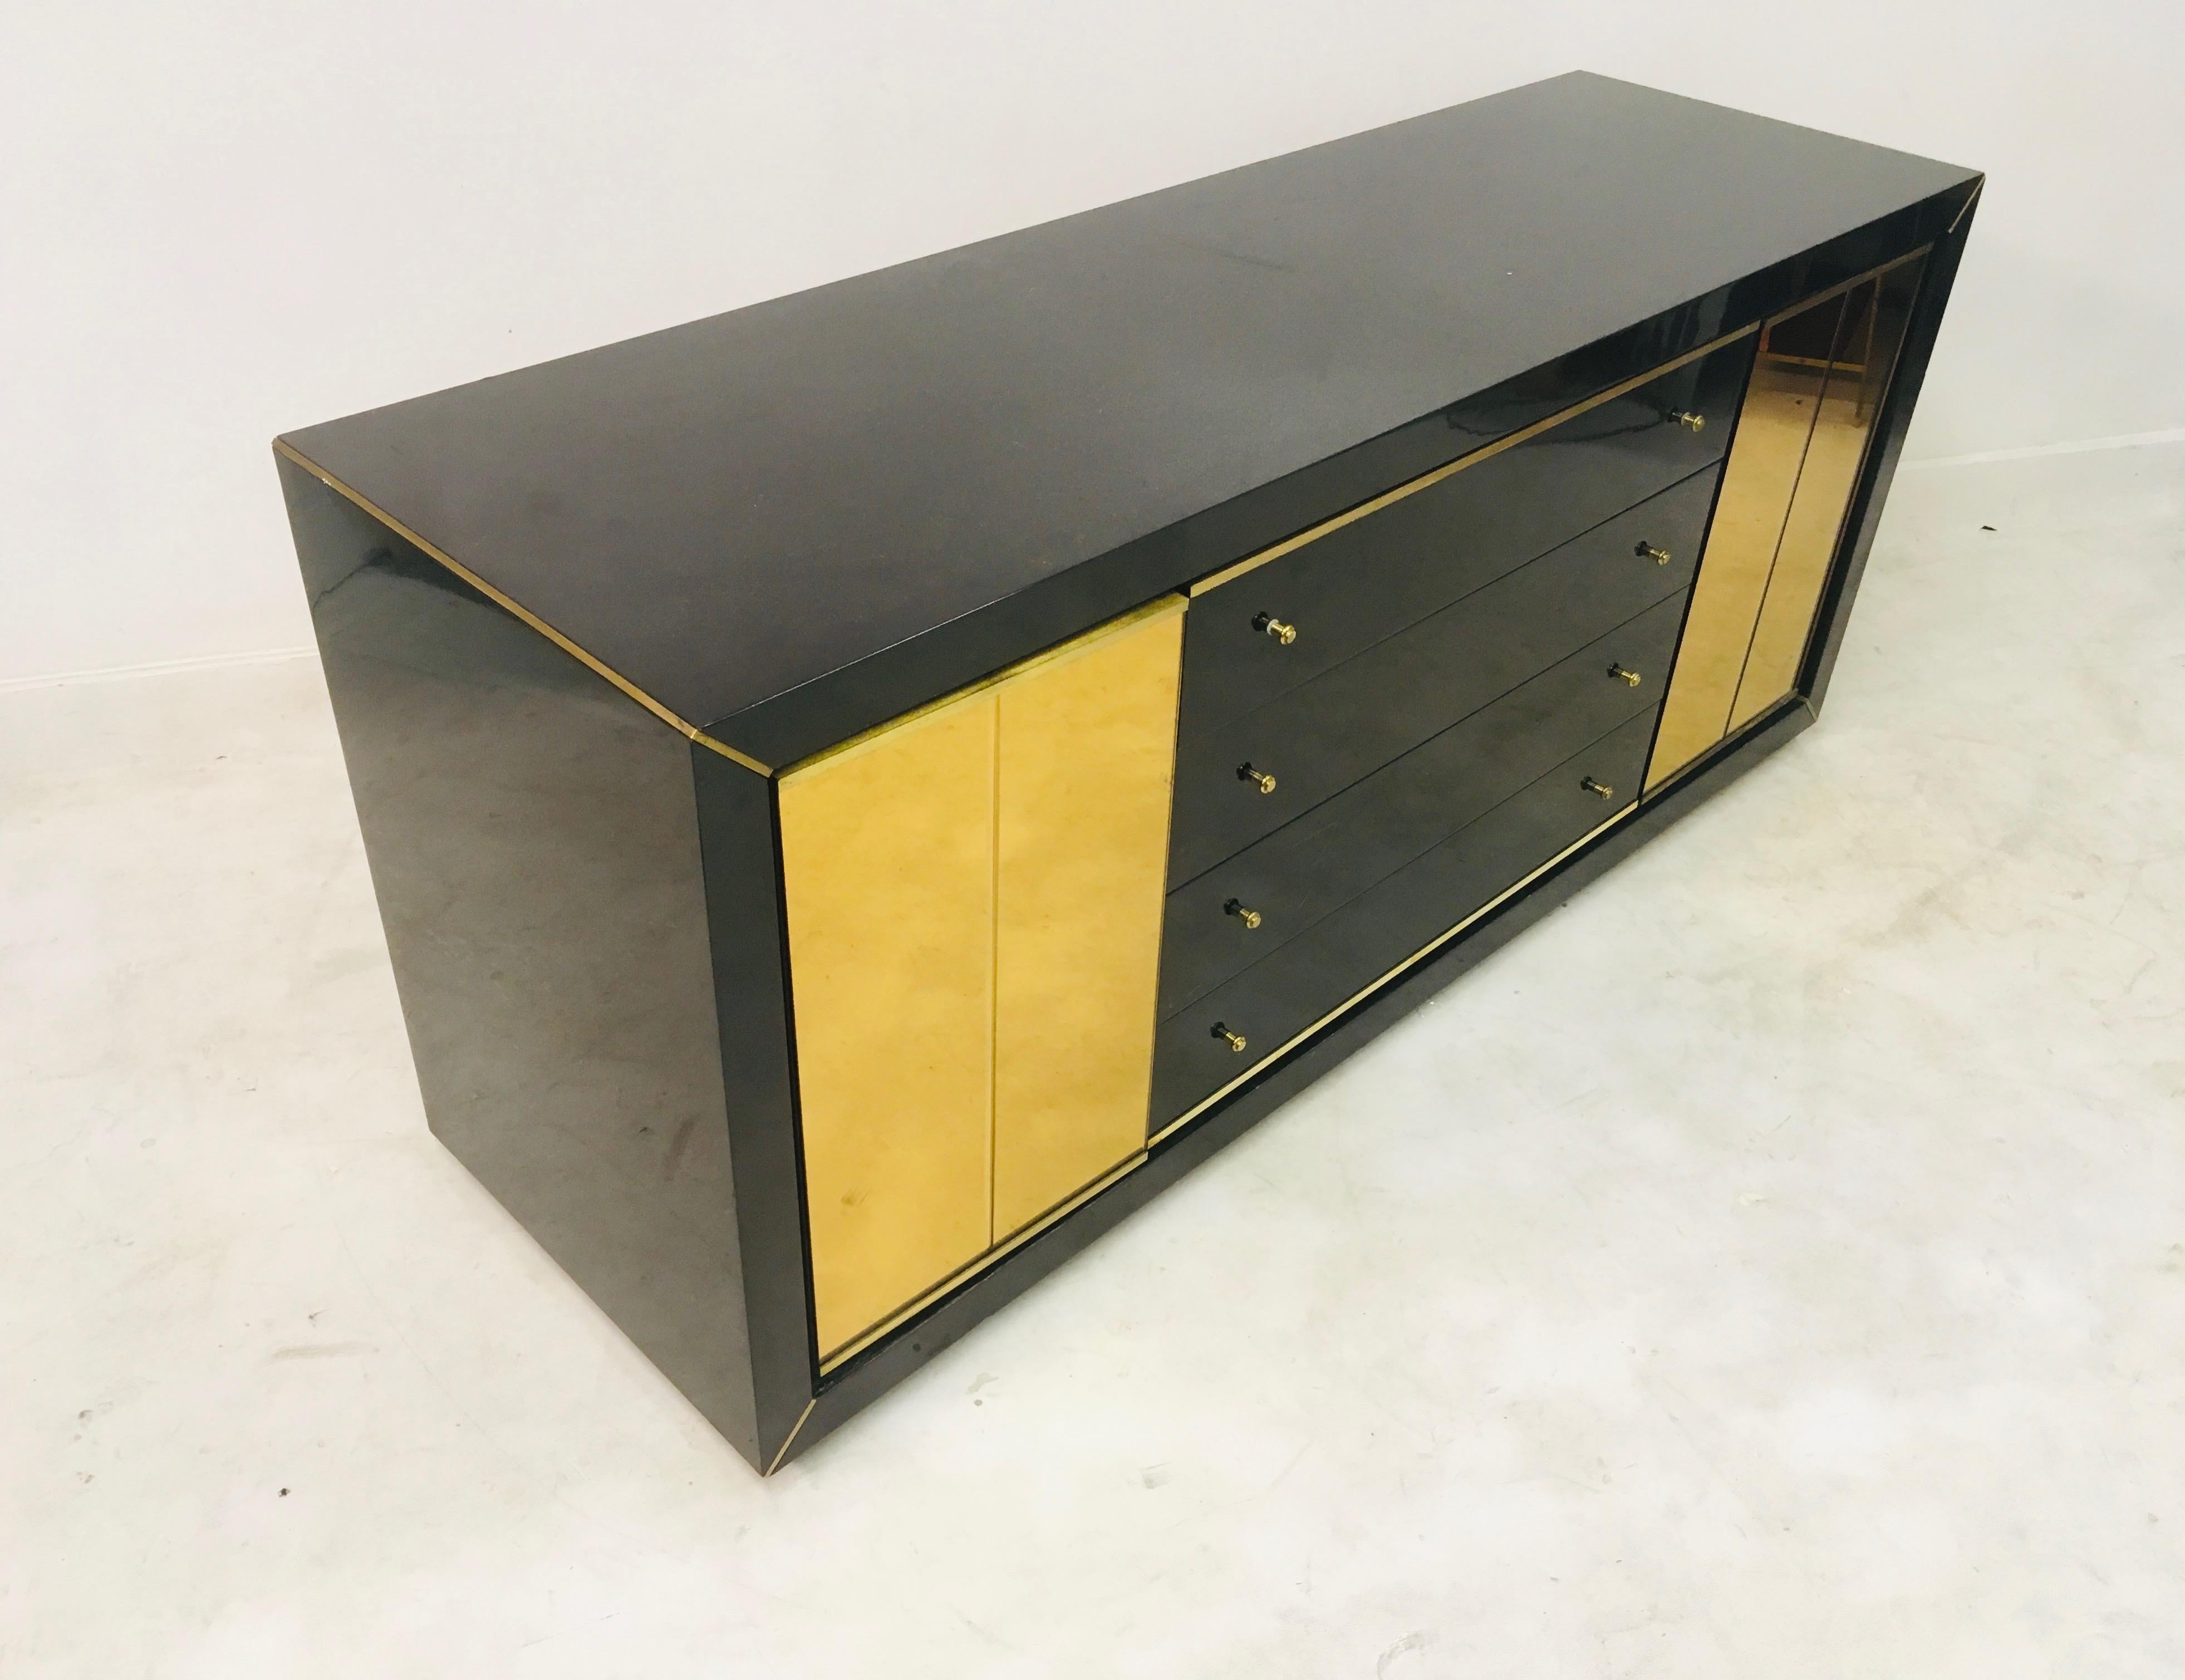 Vintage 1970s Italian Black Lacquer and Brass Sideboard (20. Jahrhundert)